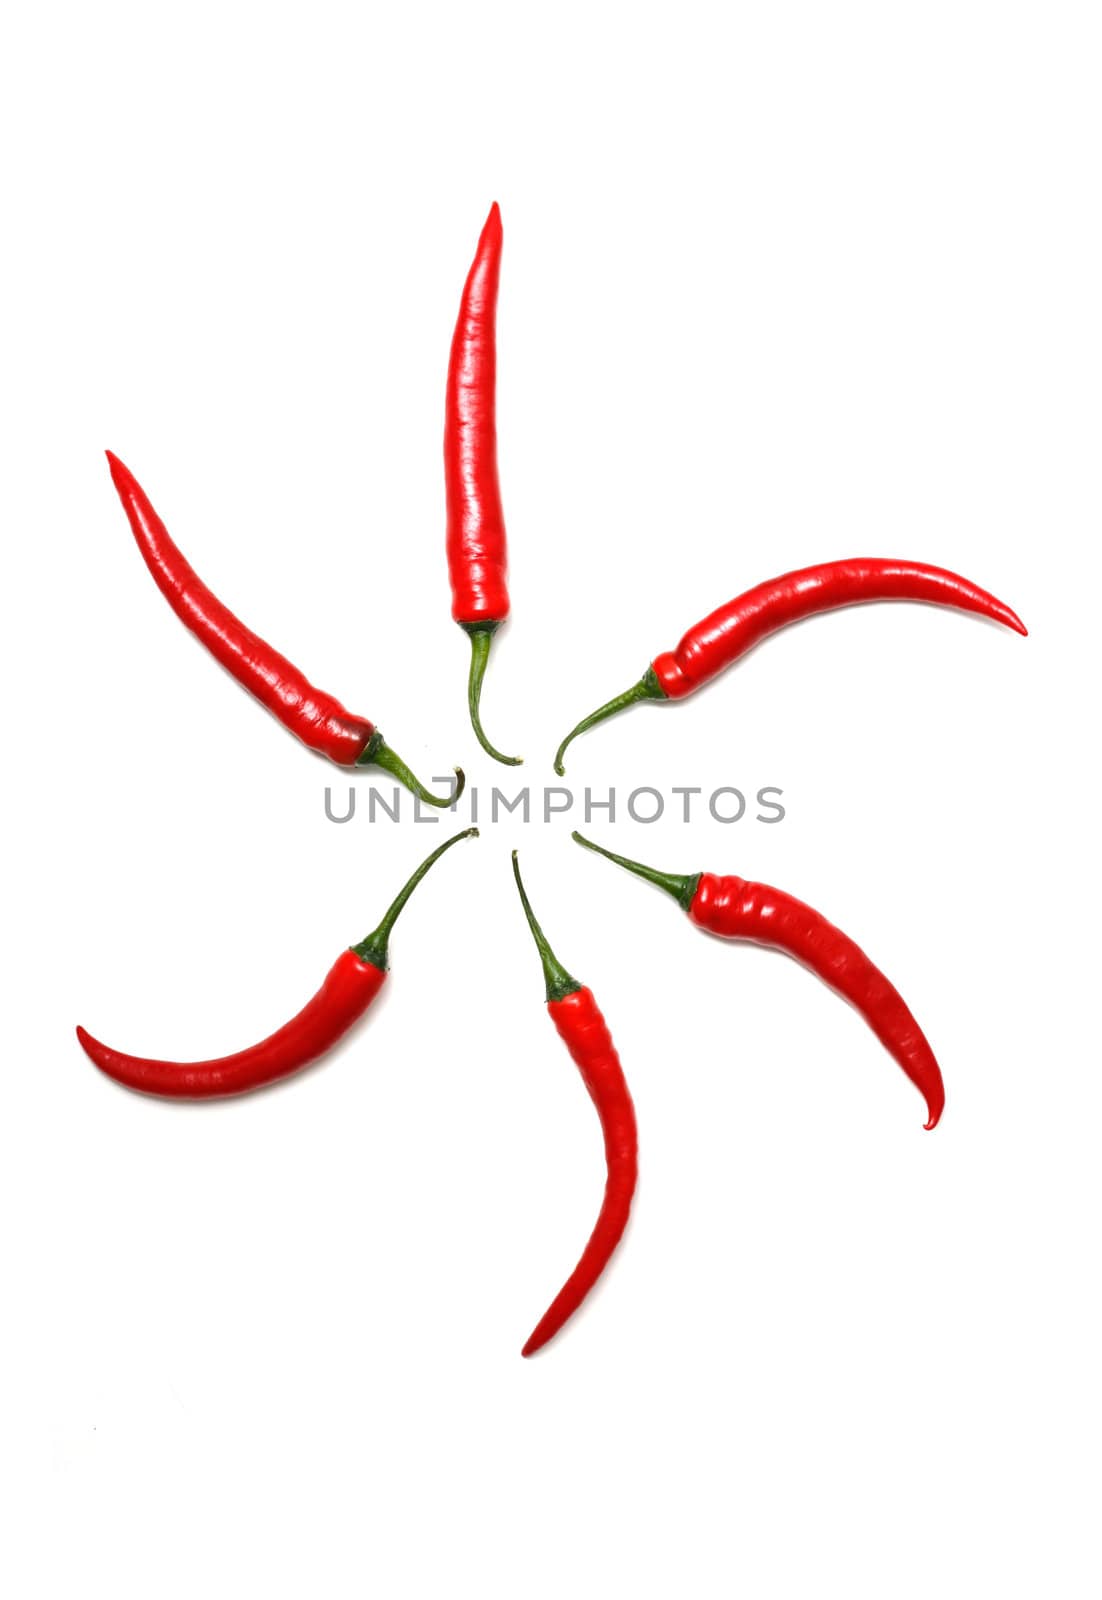 Chili peppers by leeser